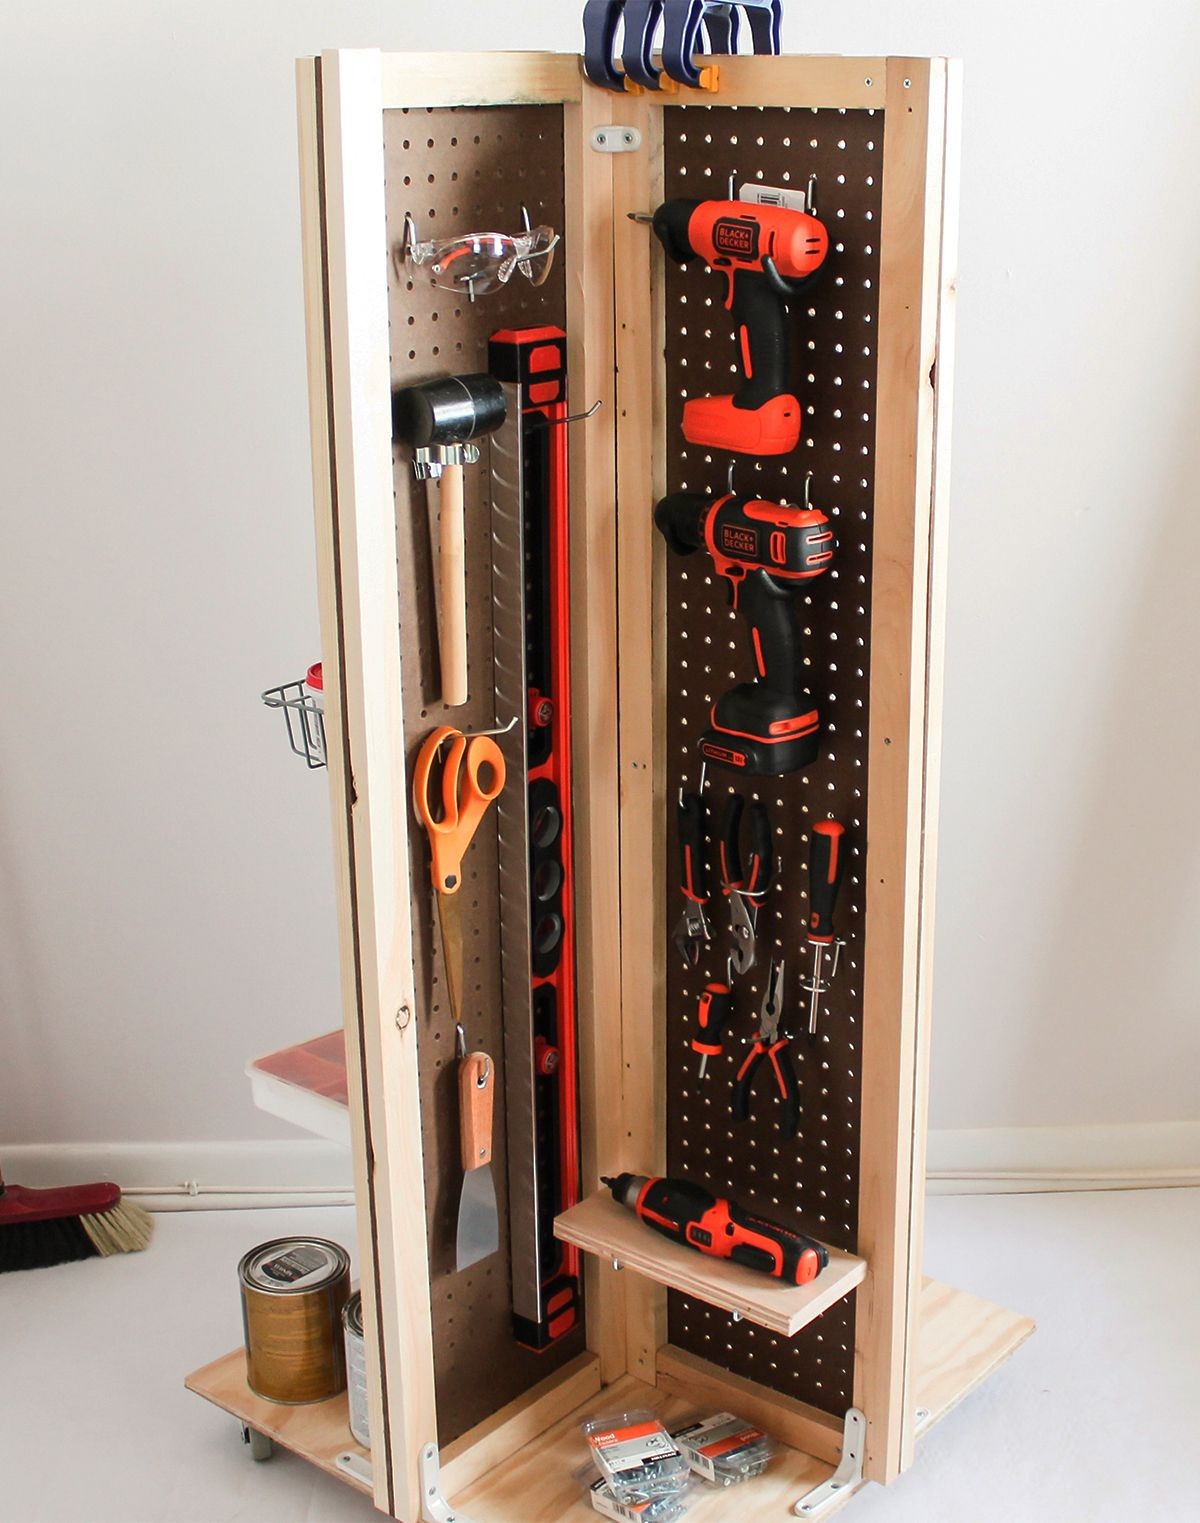 DIY Tool Organizer Ideas
 How to Make a Rolling Pegboard Tool Cart